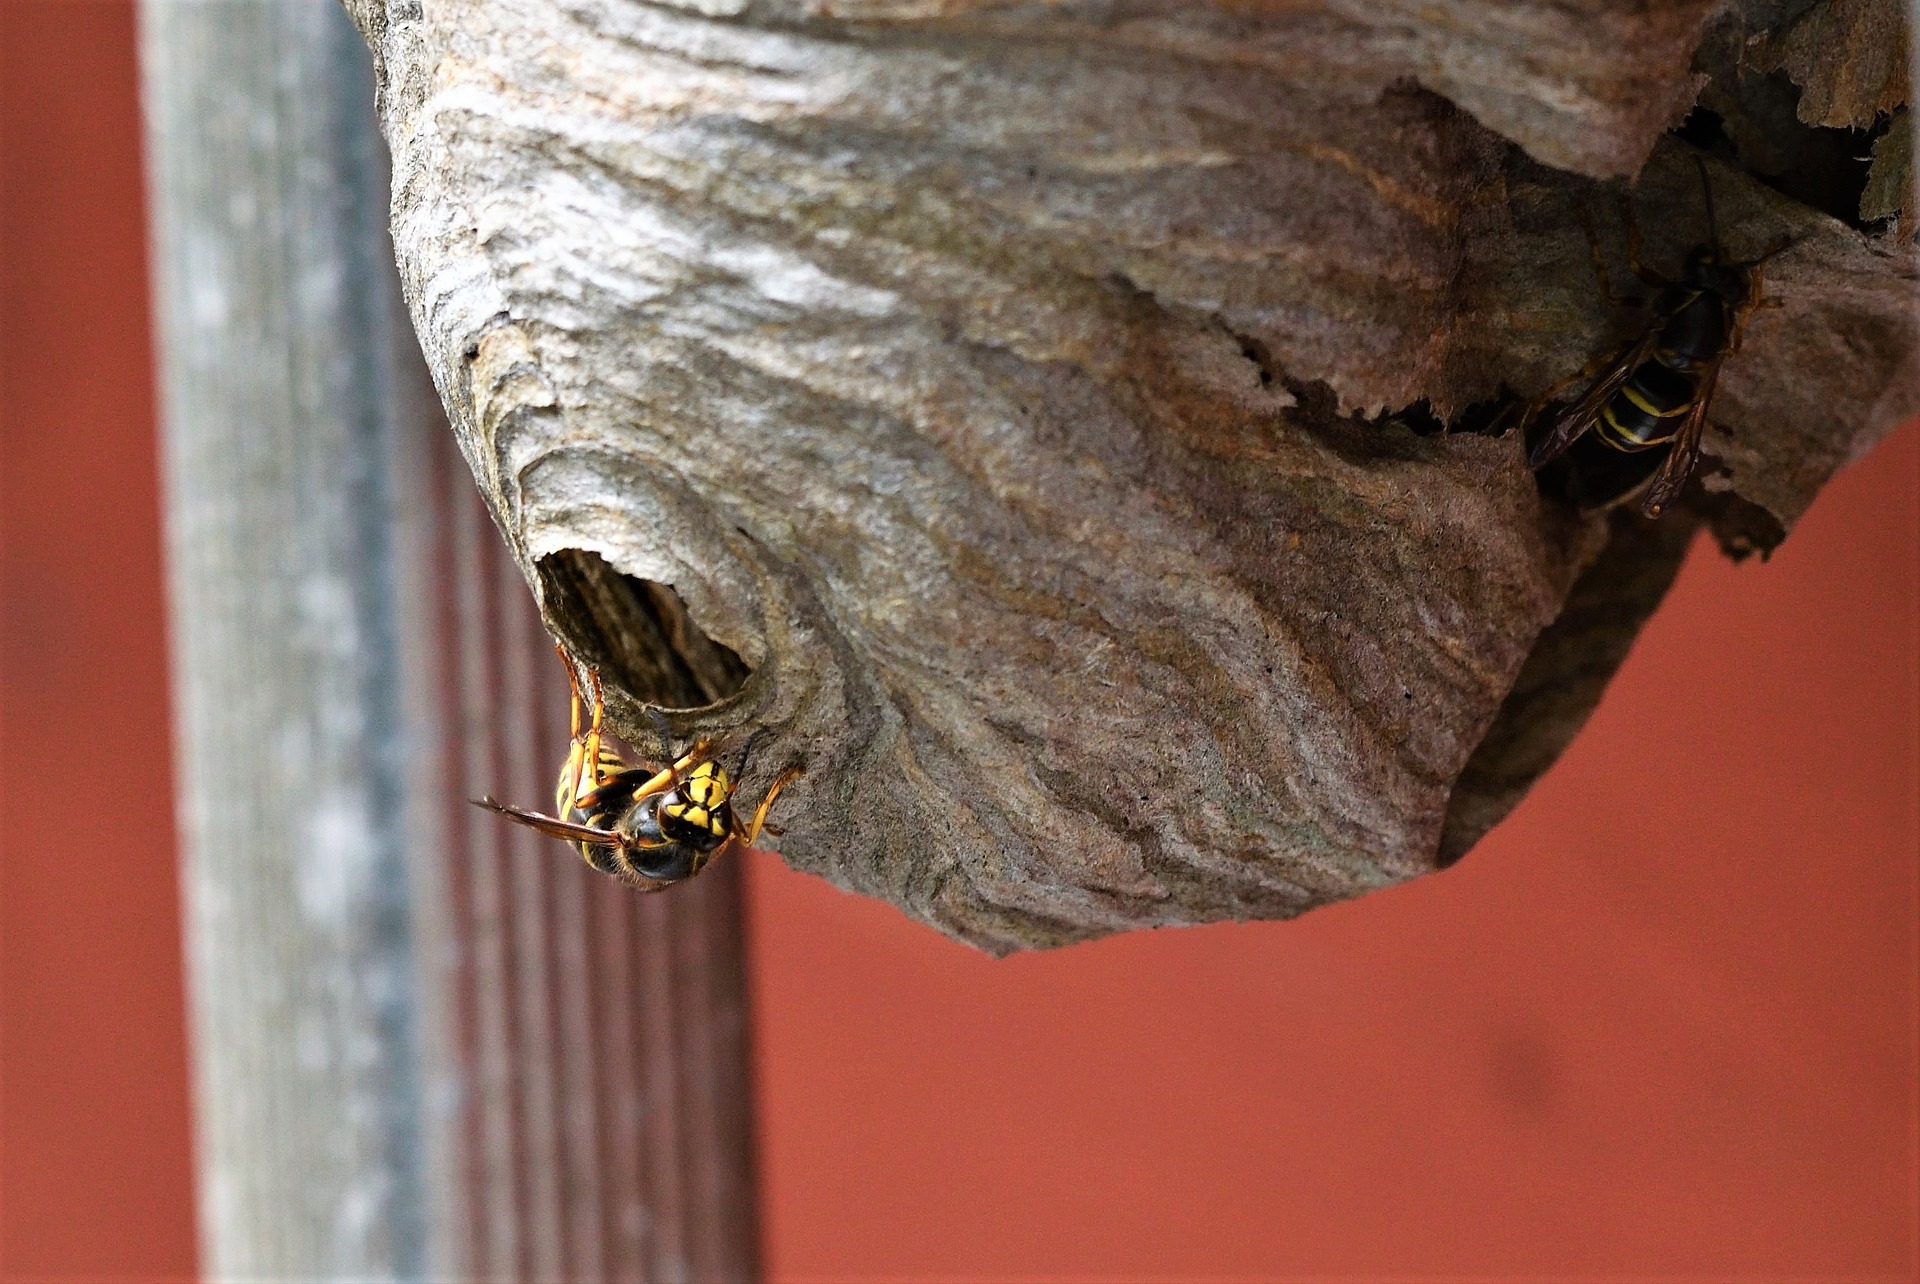 Wasps in a nest